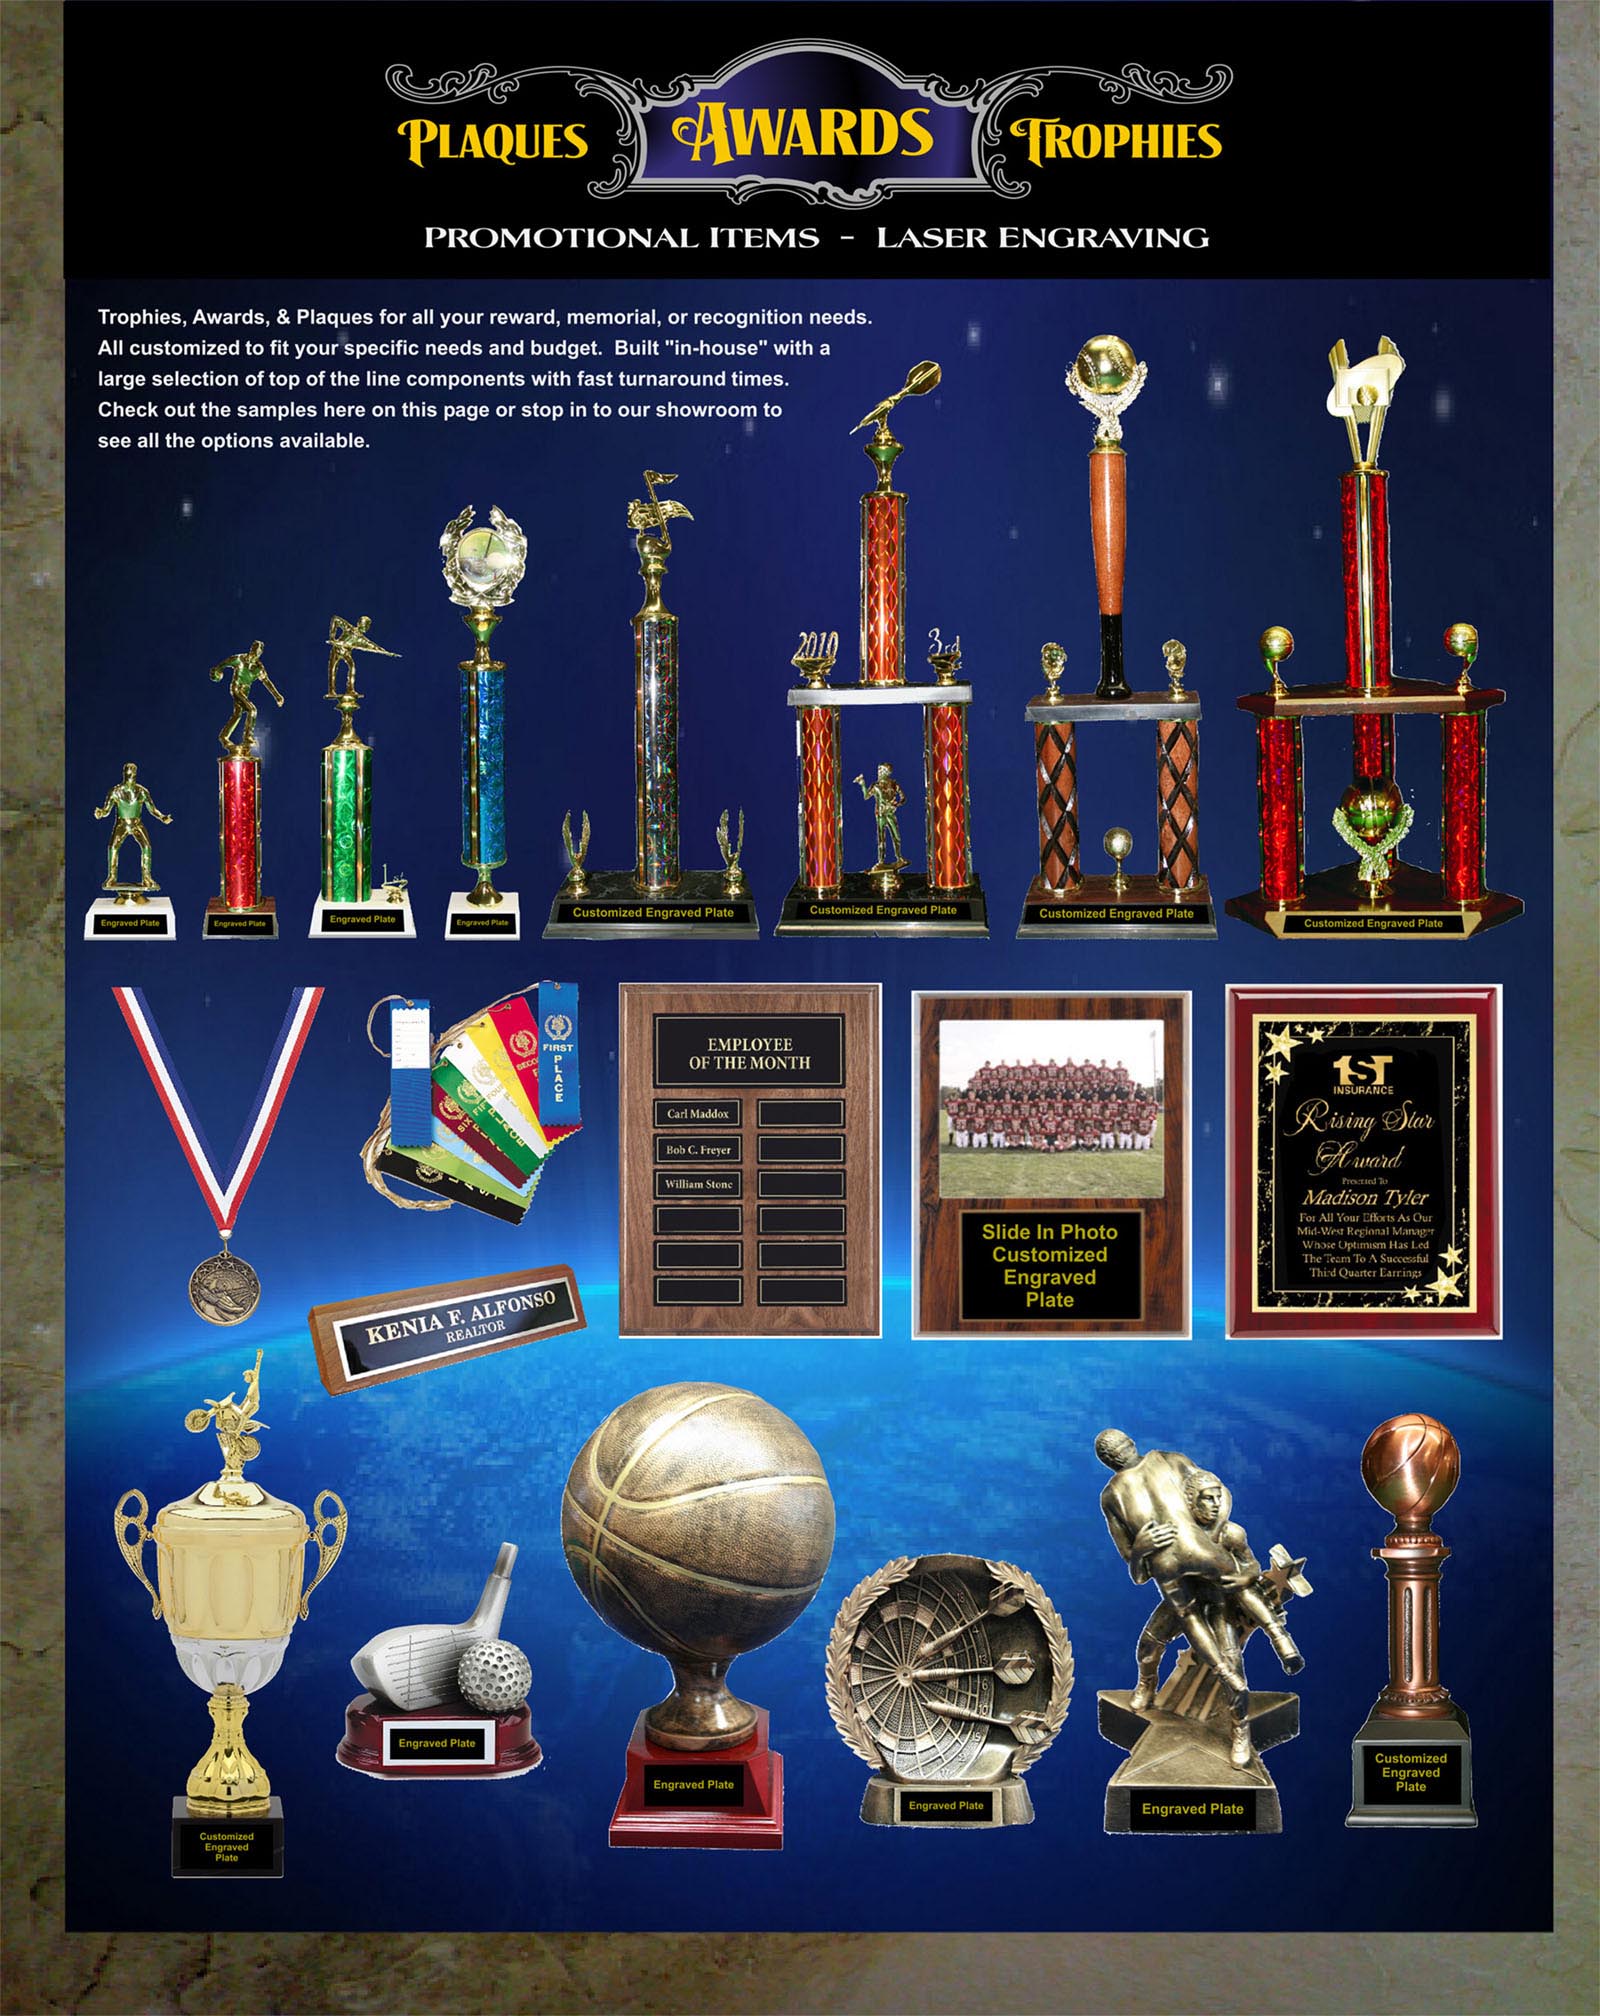 Plaques - Awards - Trophies - Promotional Items and Laser Engraving.  Check out our newest division! Trophies, Awards, and Plaques for all your reward, memorial, or recognition needs.  all customized to fit your specific needs and budget.  Built "in-house" with a large selection of top of the line components with fast turnaround times. Awards Trophies Engraving in Butternut WI Park Falls WI and Price County WI  